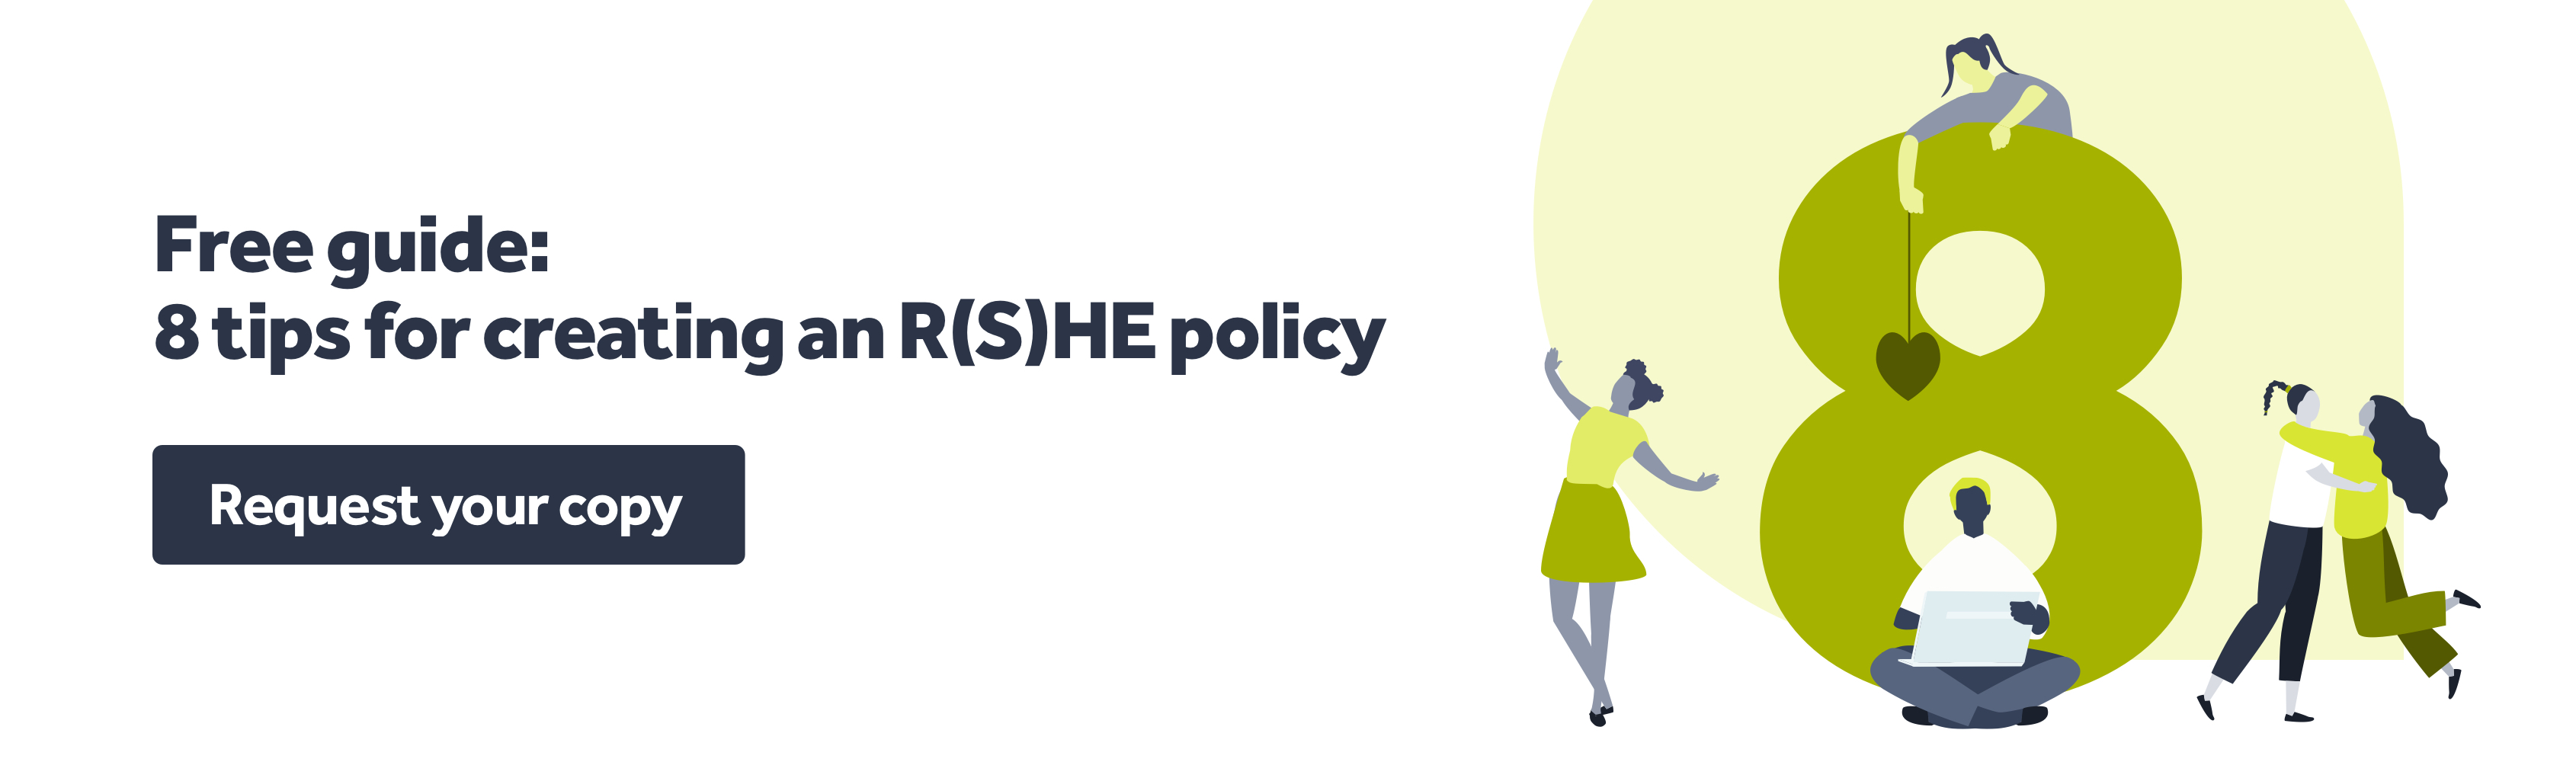 RSHE policy